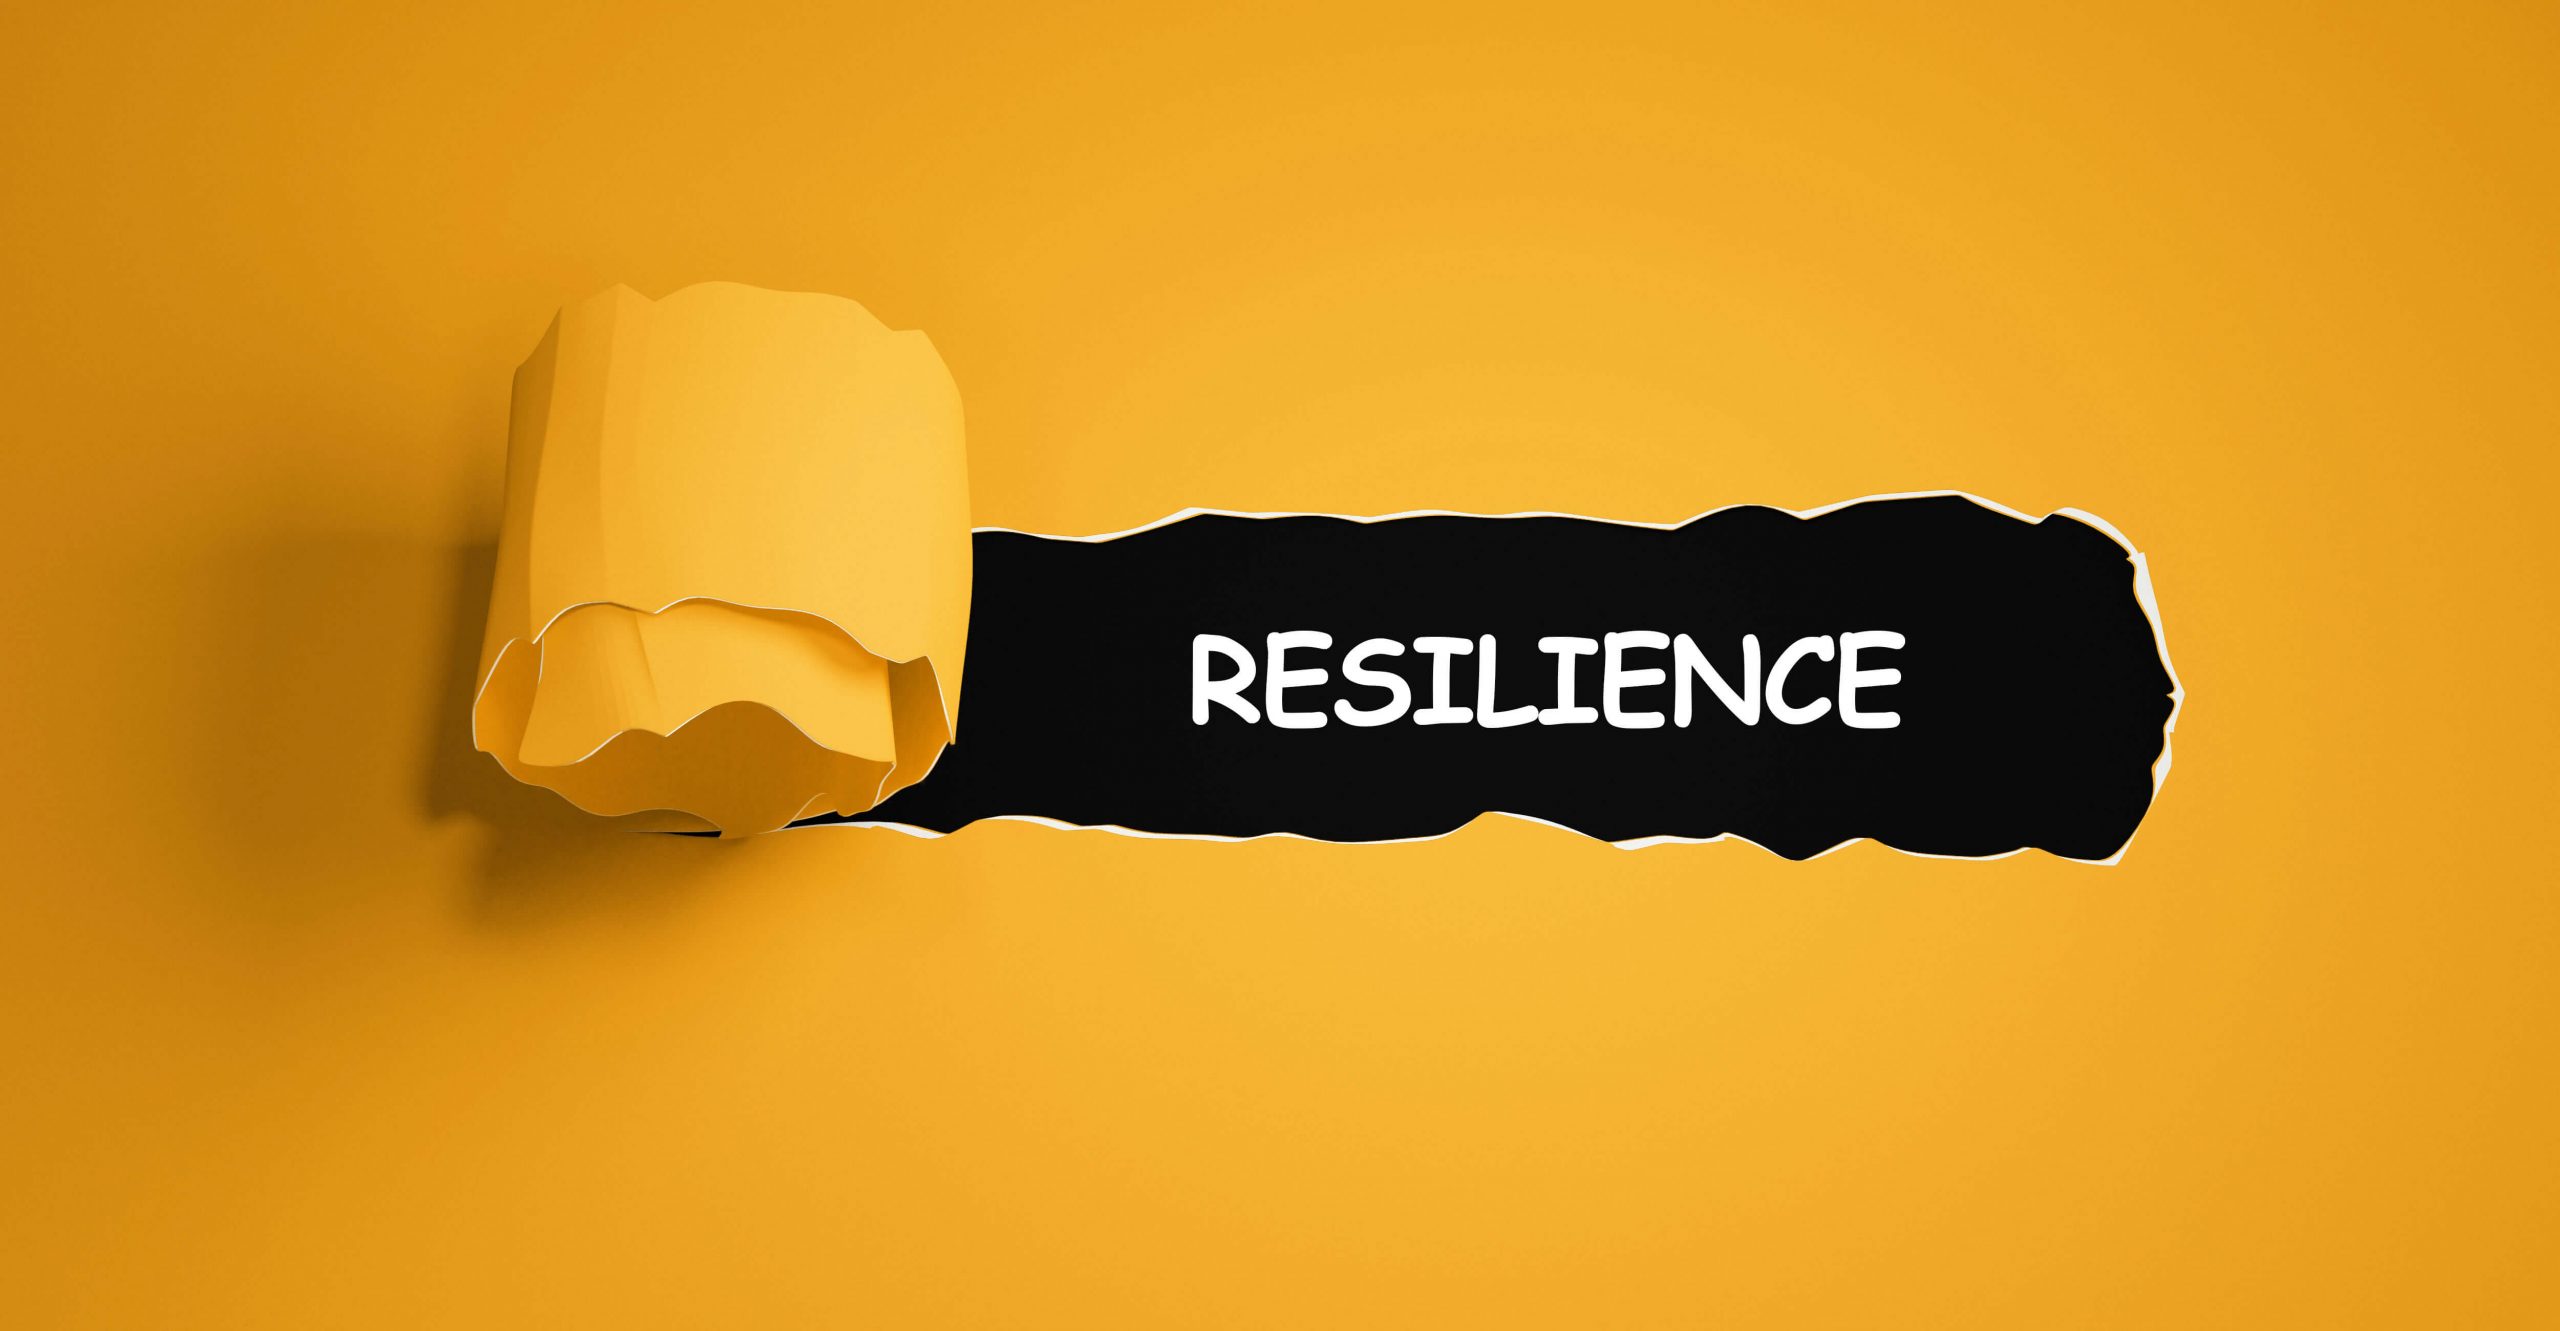 Building Resilience during challenging times